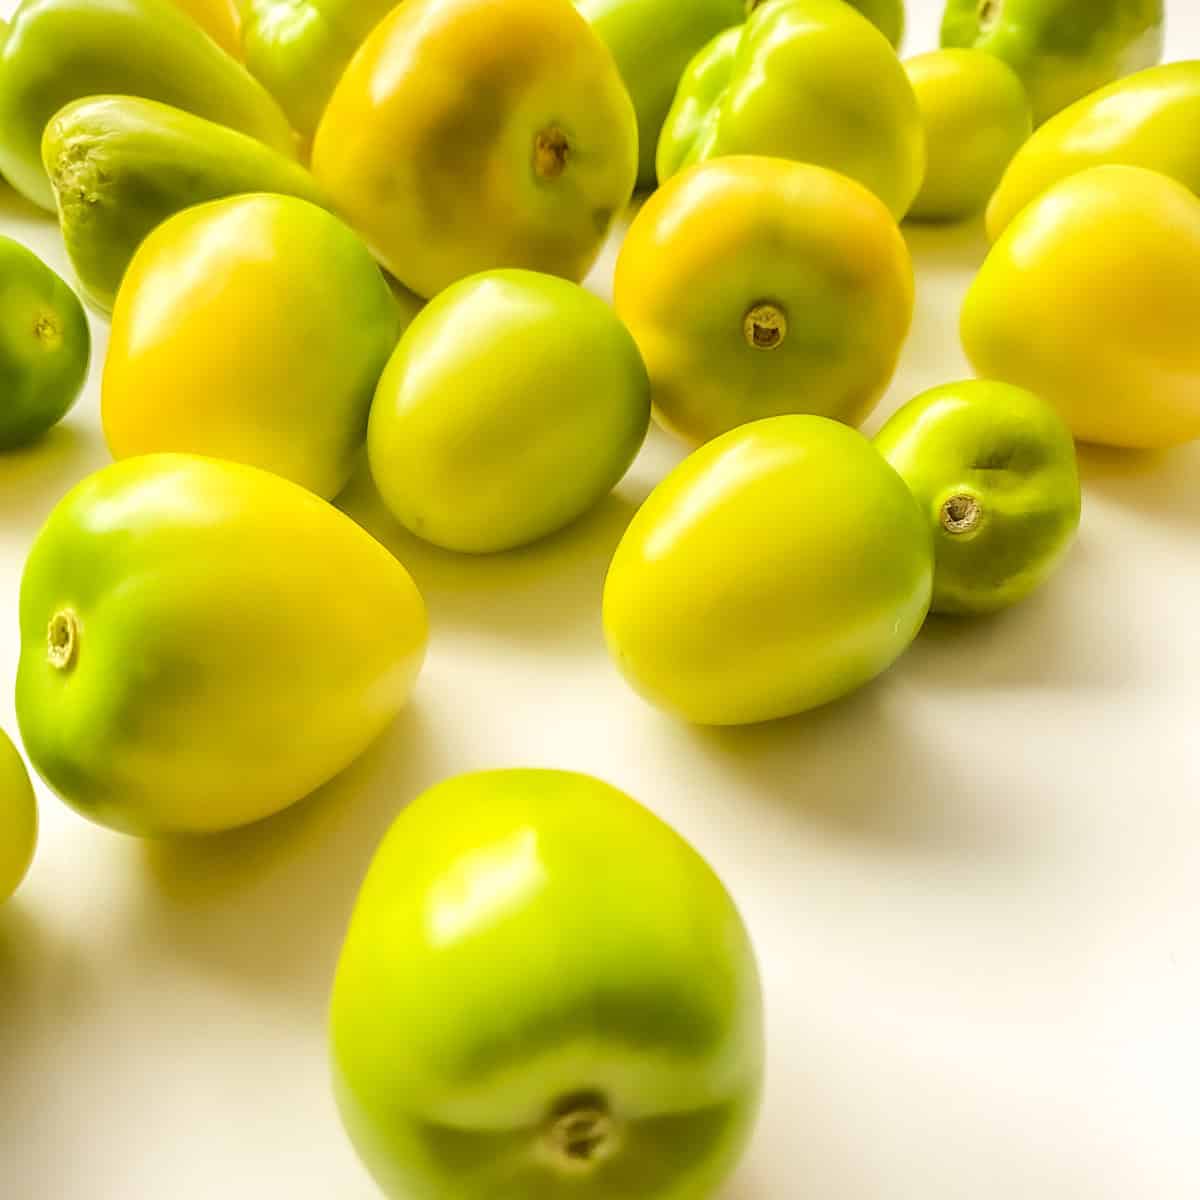 An image of yellow tomatillos on a white countertop.